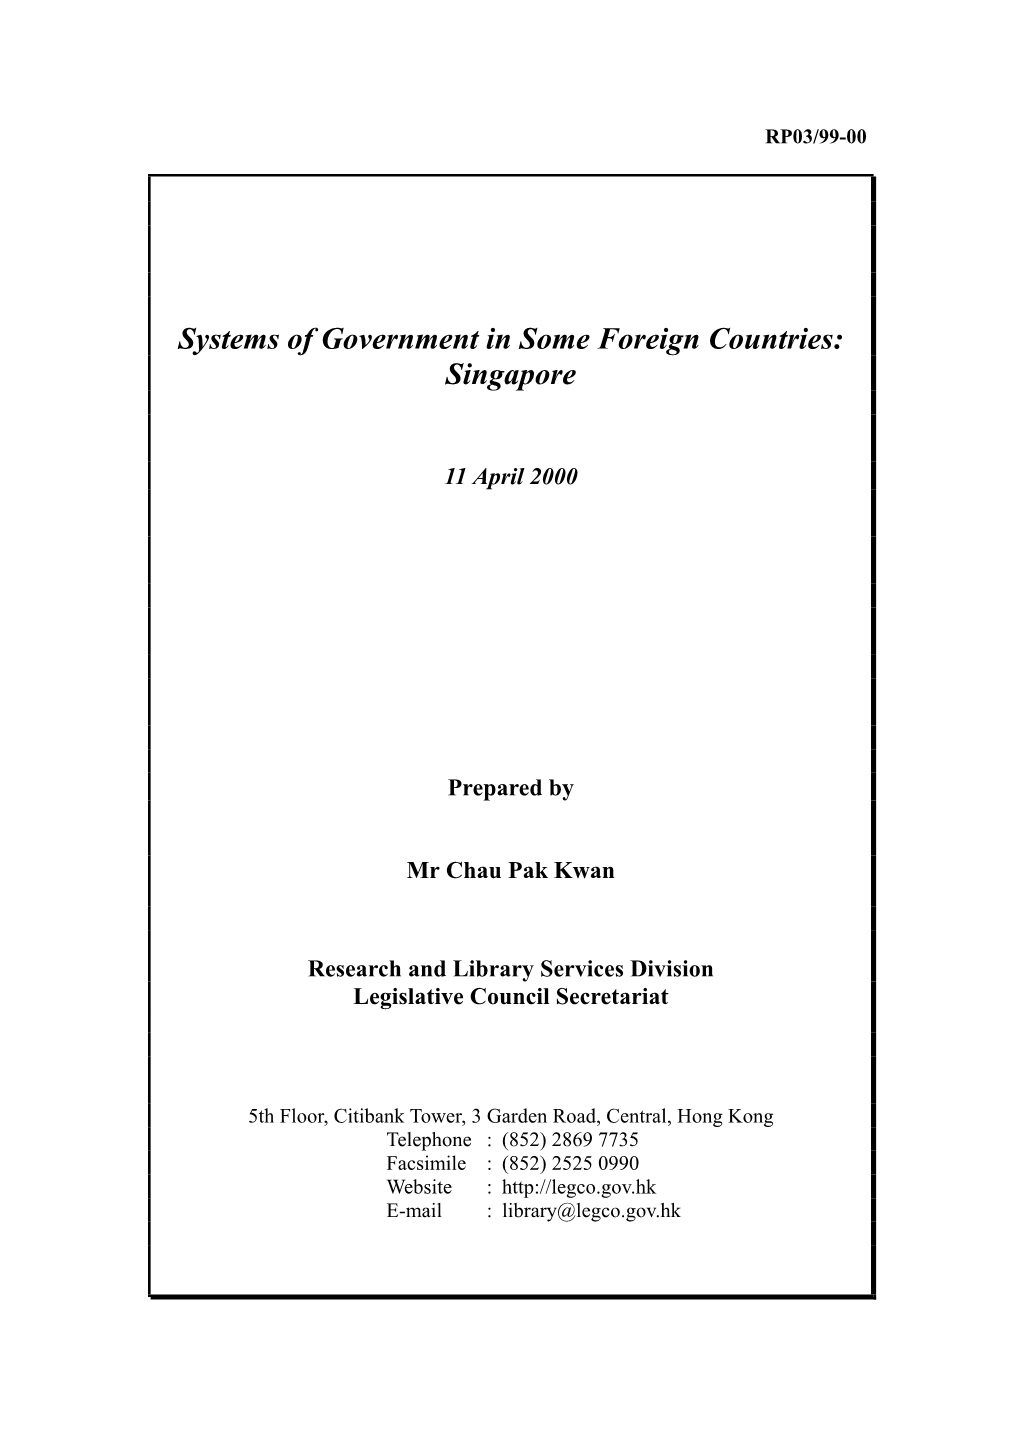 Systems of Government in Some Foreign Countries: Singapore